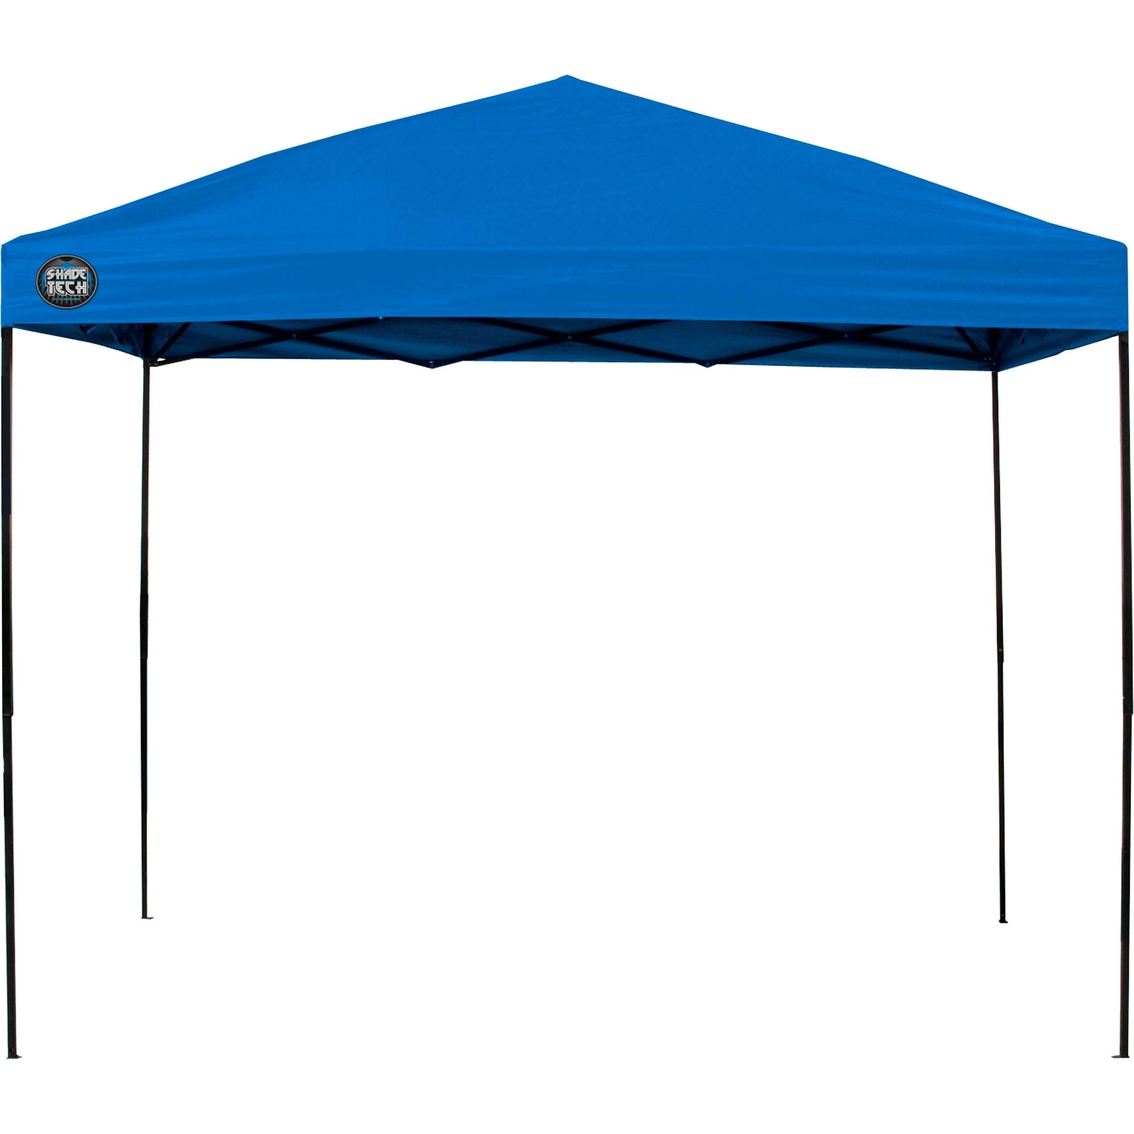 Blue 10' x 10' Canopy Replacement Cover for Straight Leg Canopies 